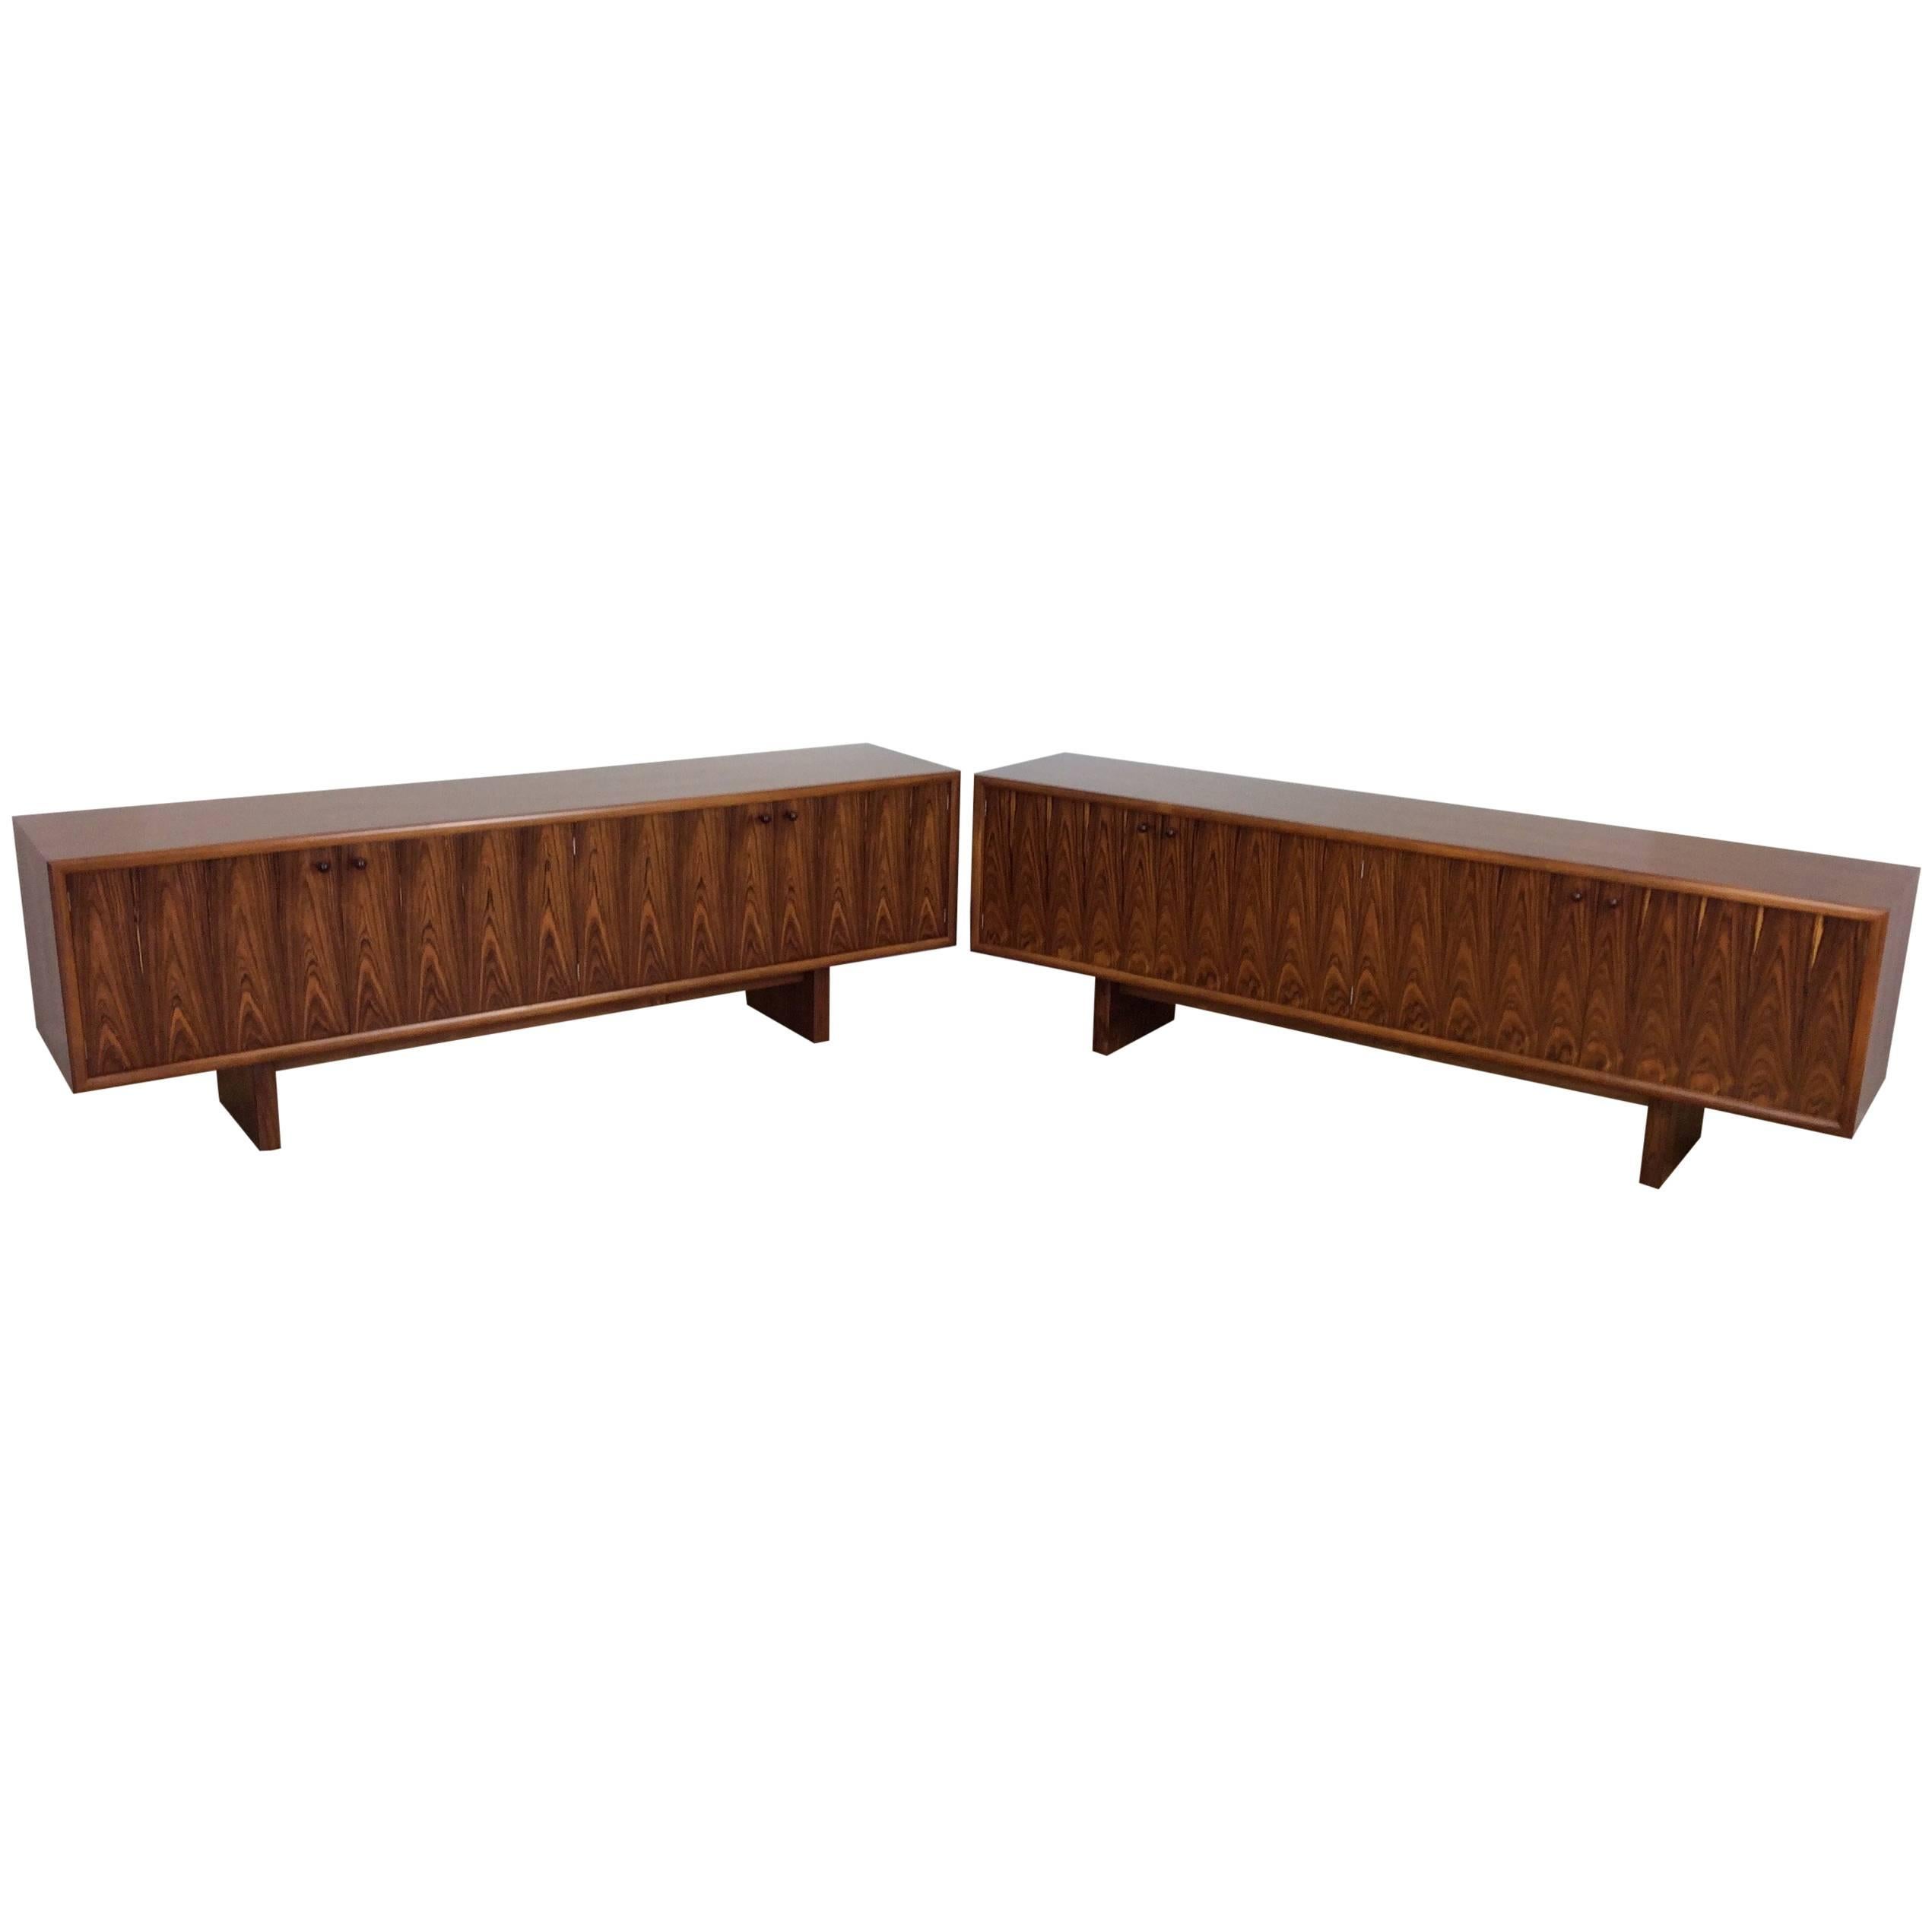 Midcentury Rosewood Sideboards Credenza Designed by Martin Hall